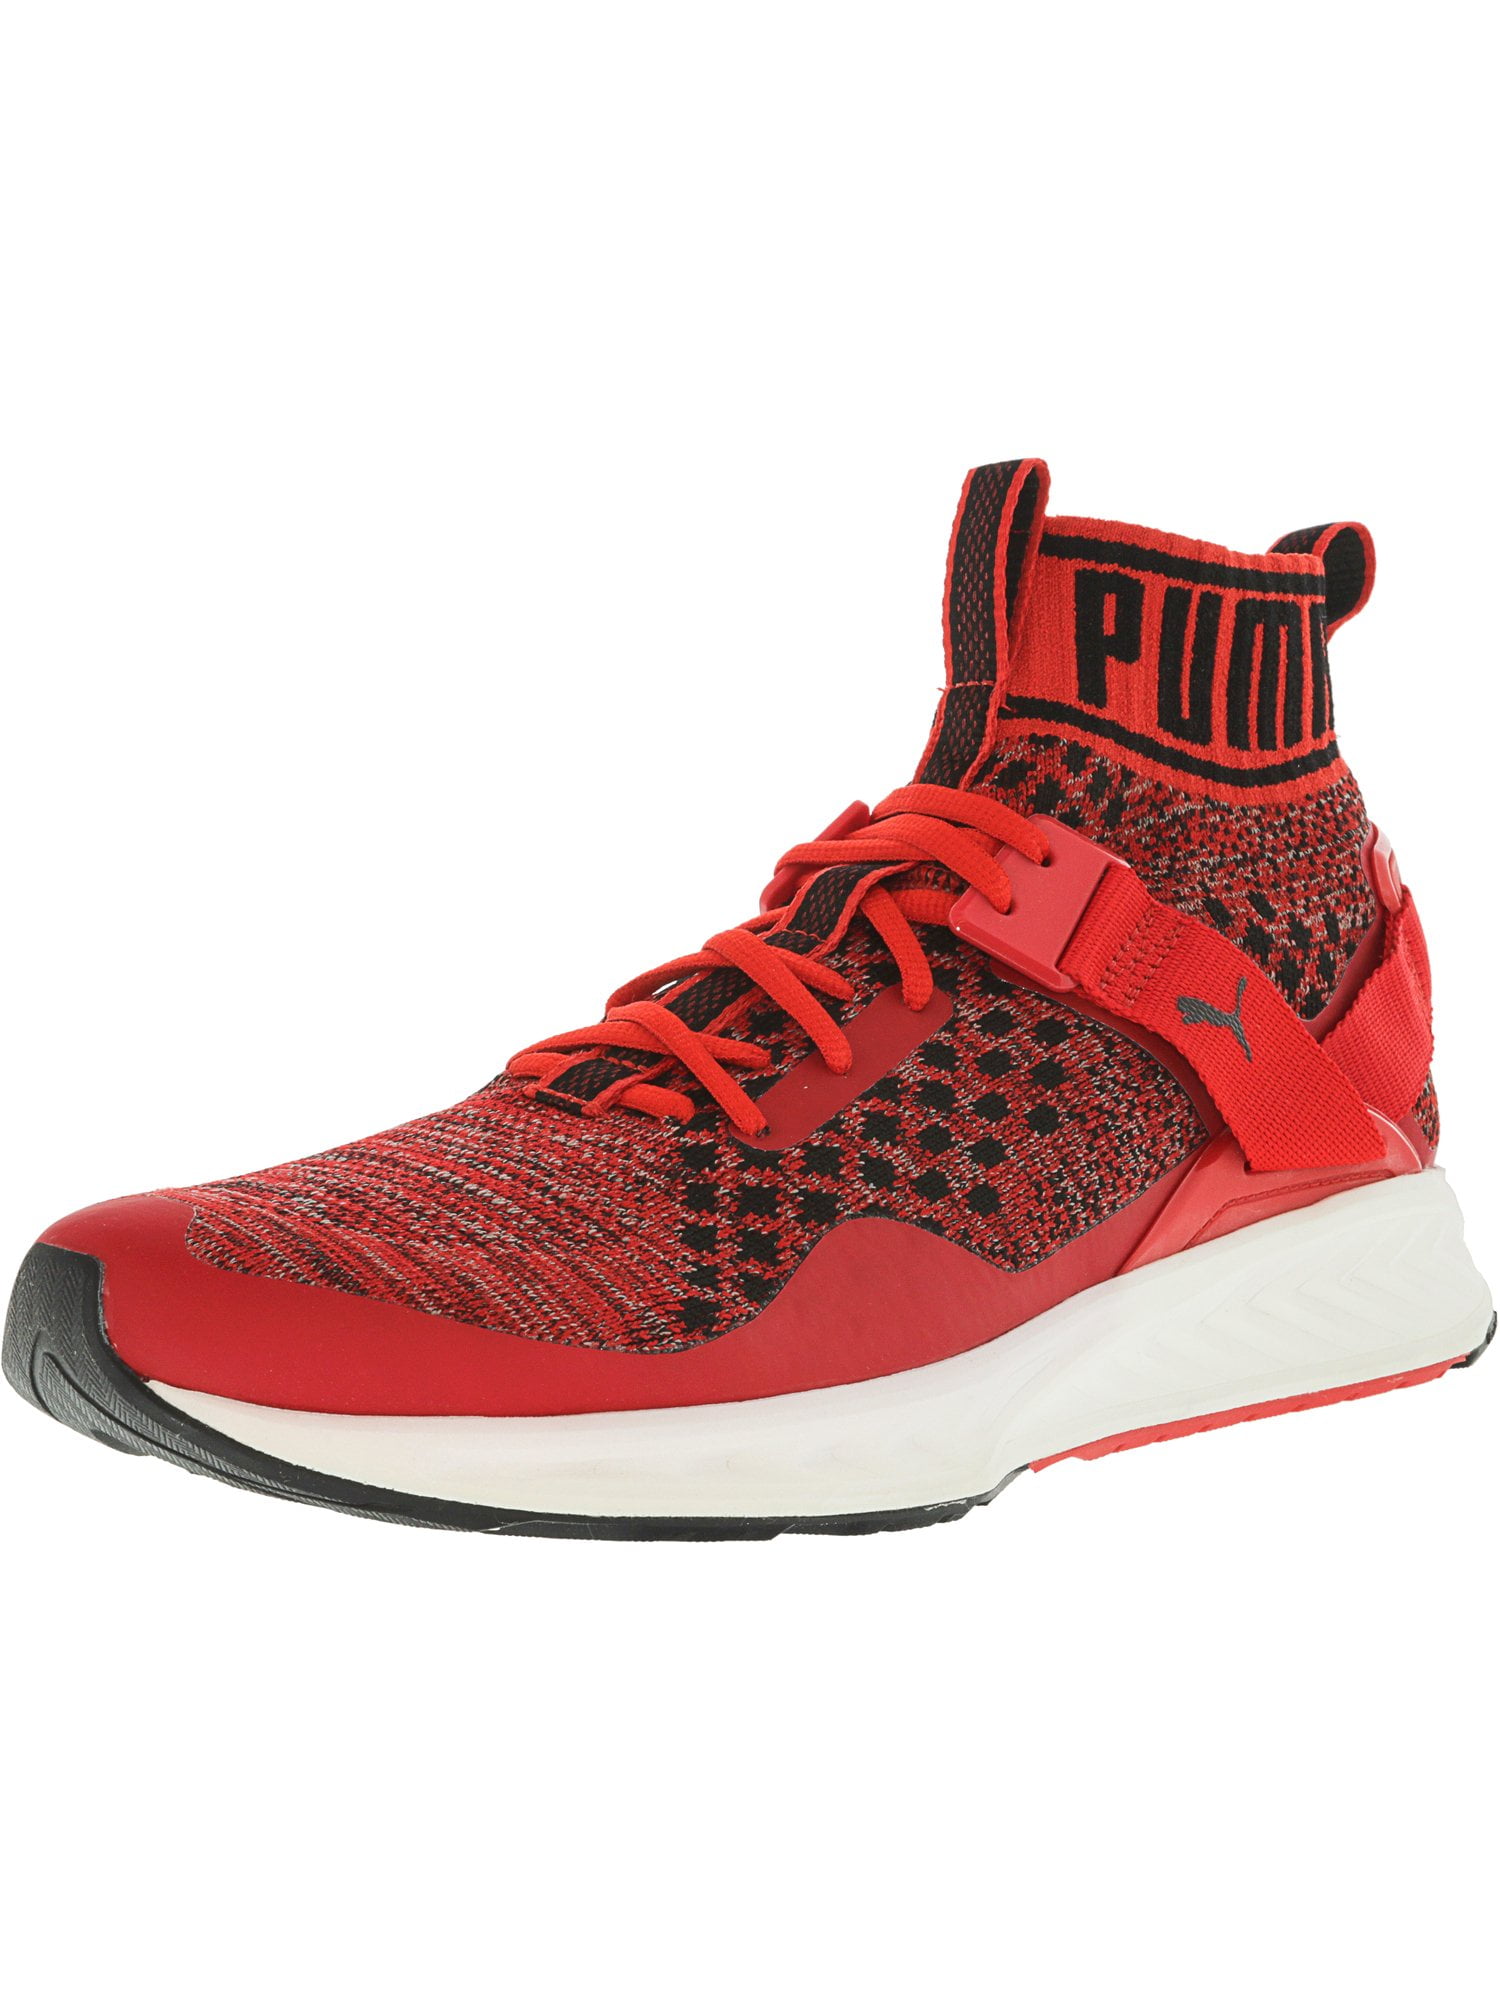 puma high ankle red shoes